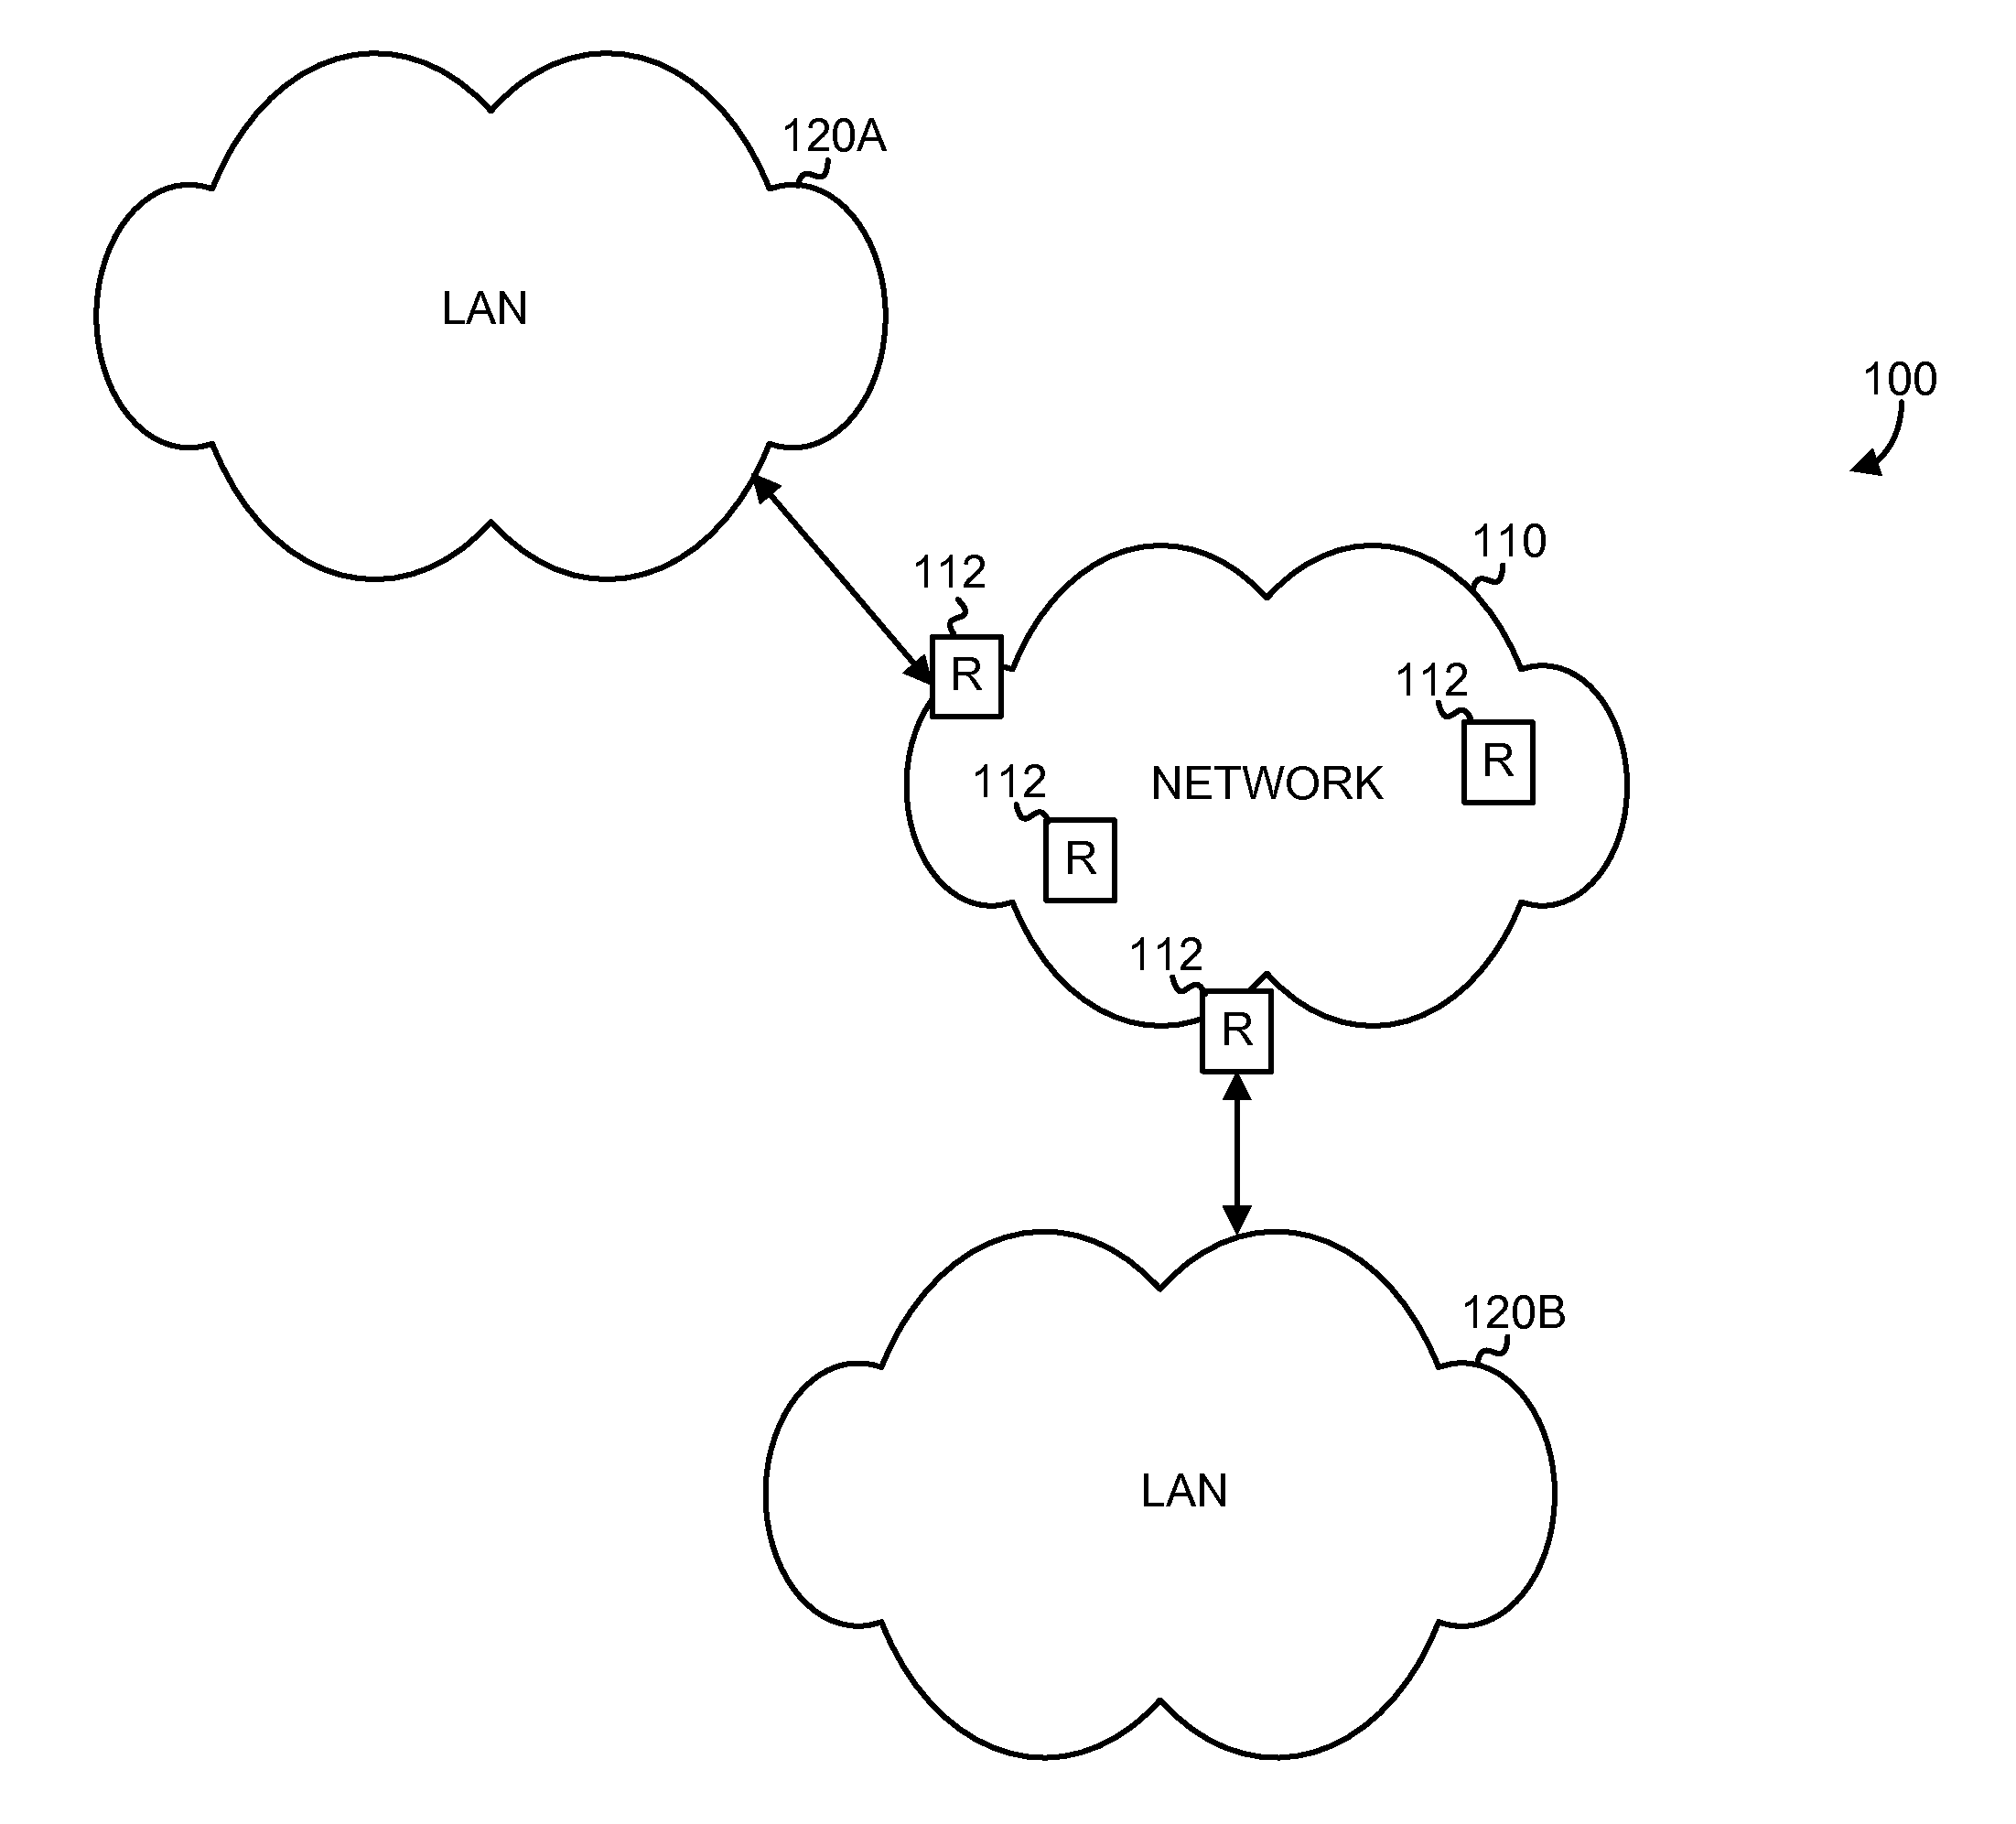 Selection of multicast router interfaces in an l2 switch connecting end hosts and routers, which is running igmp and pim snooping